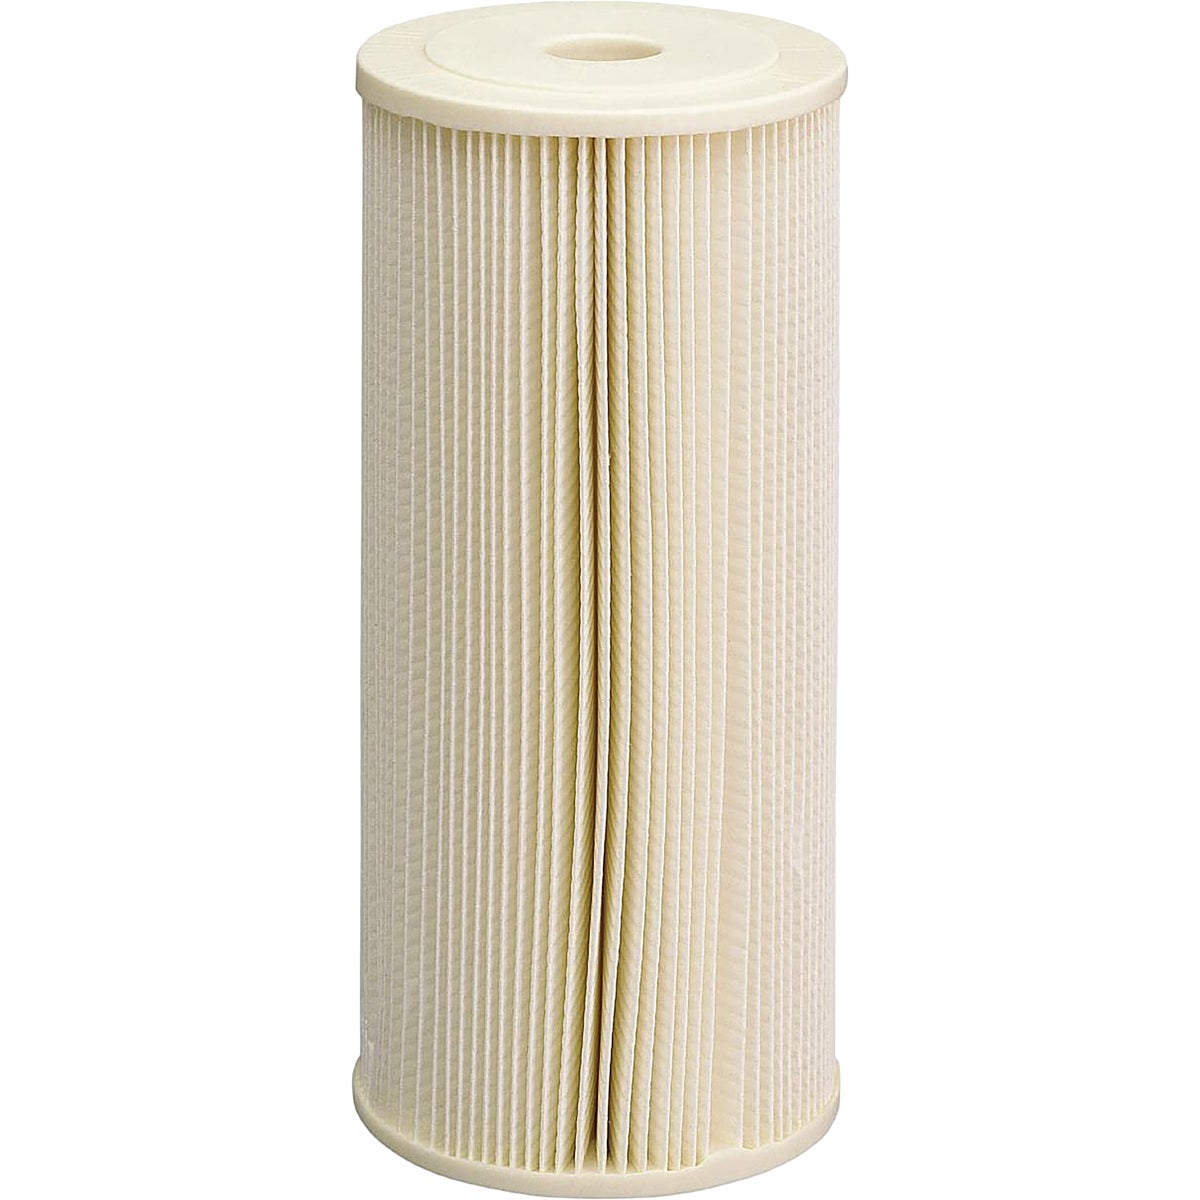 CP5-BBS Culligan Heavy Duty Sediment Whole House Water Filter Cartridge